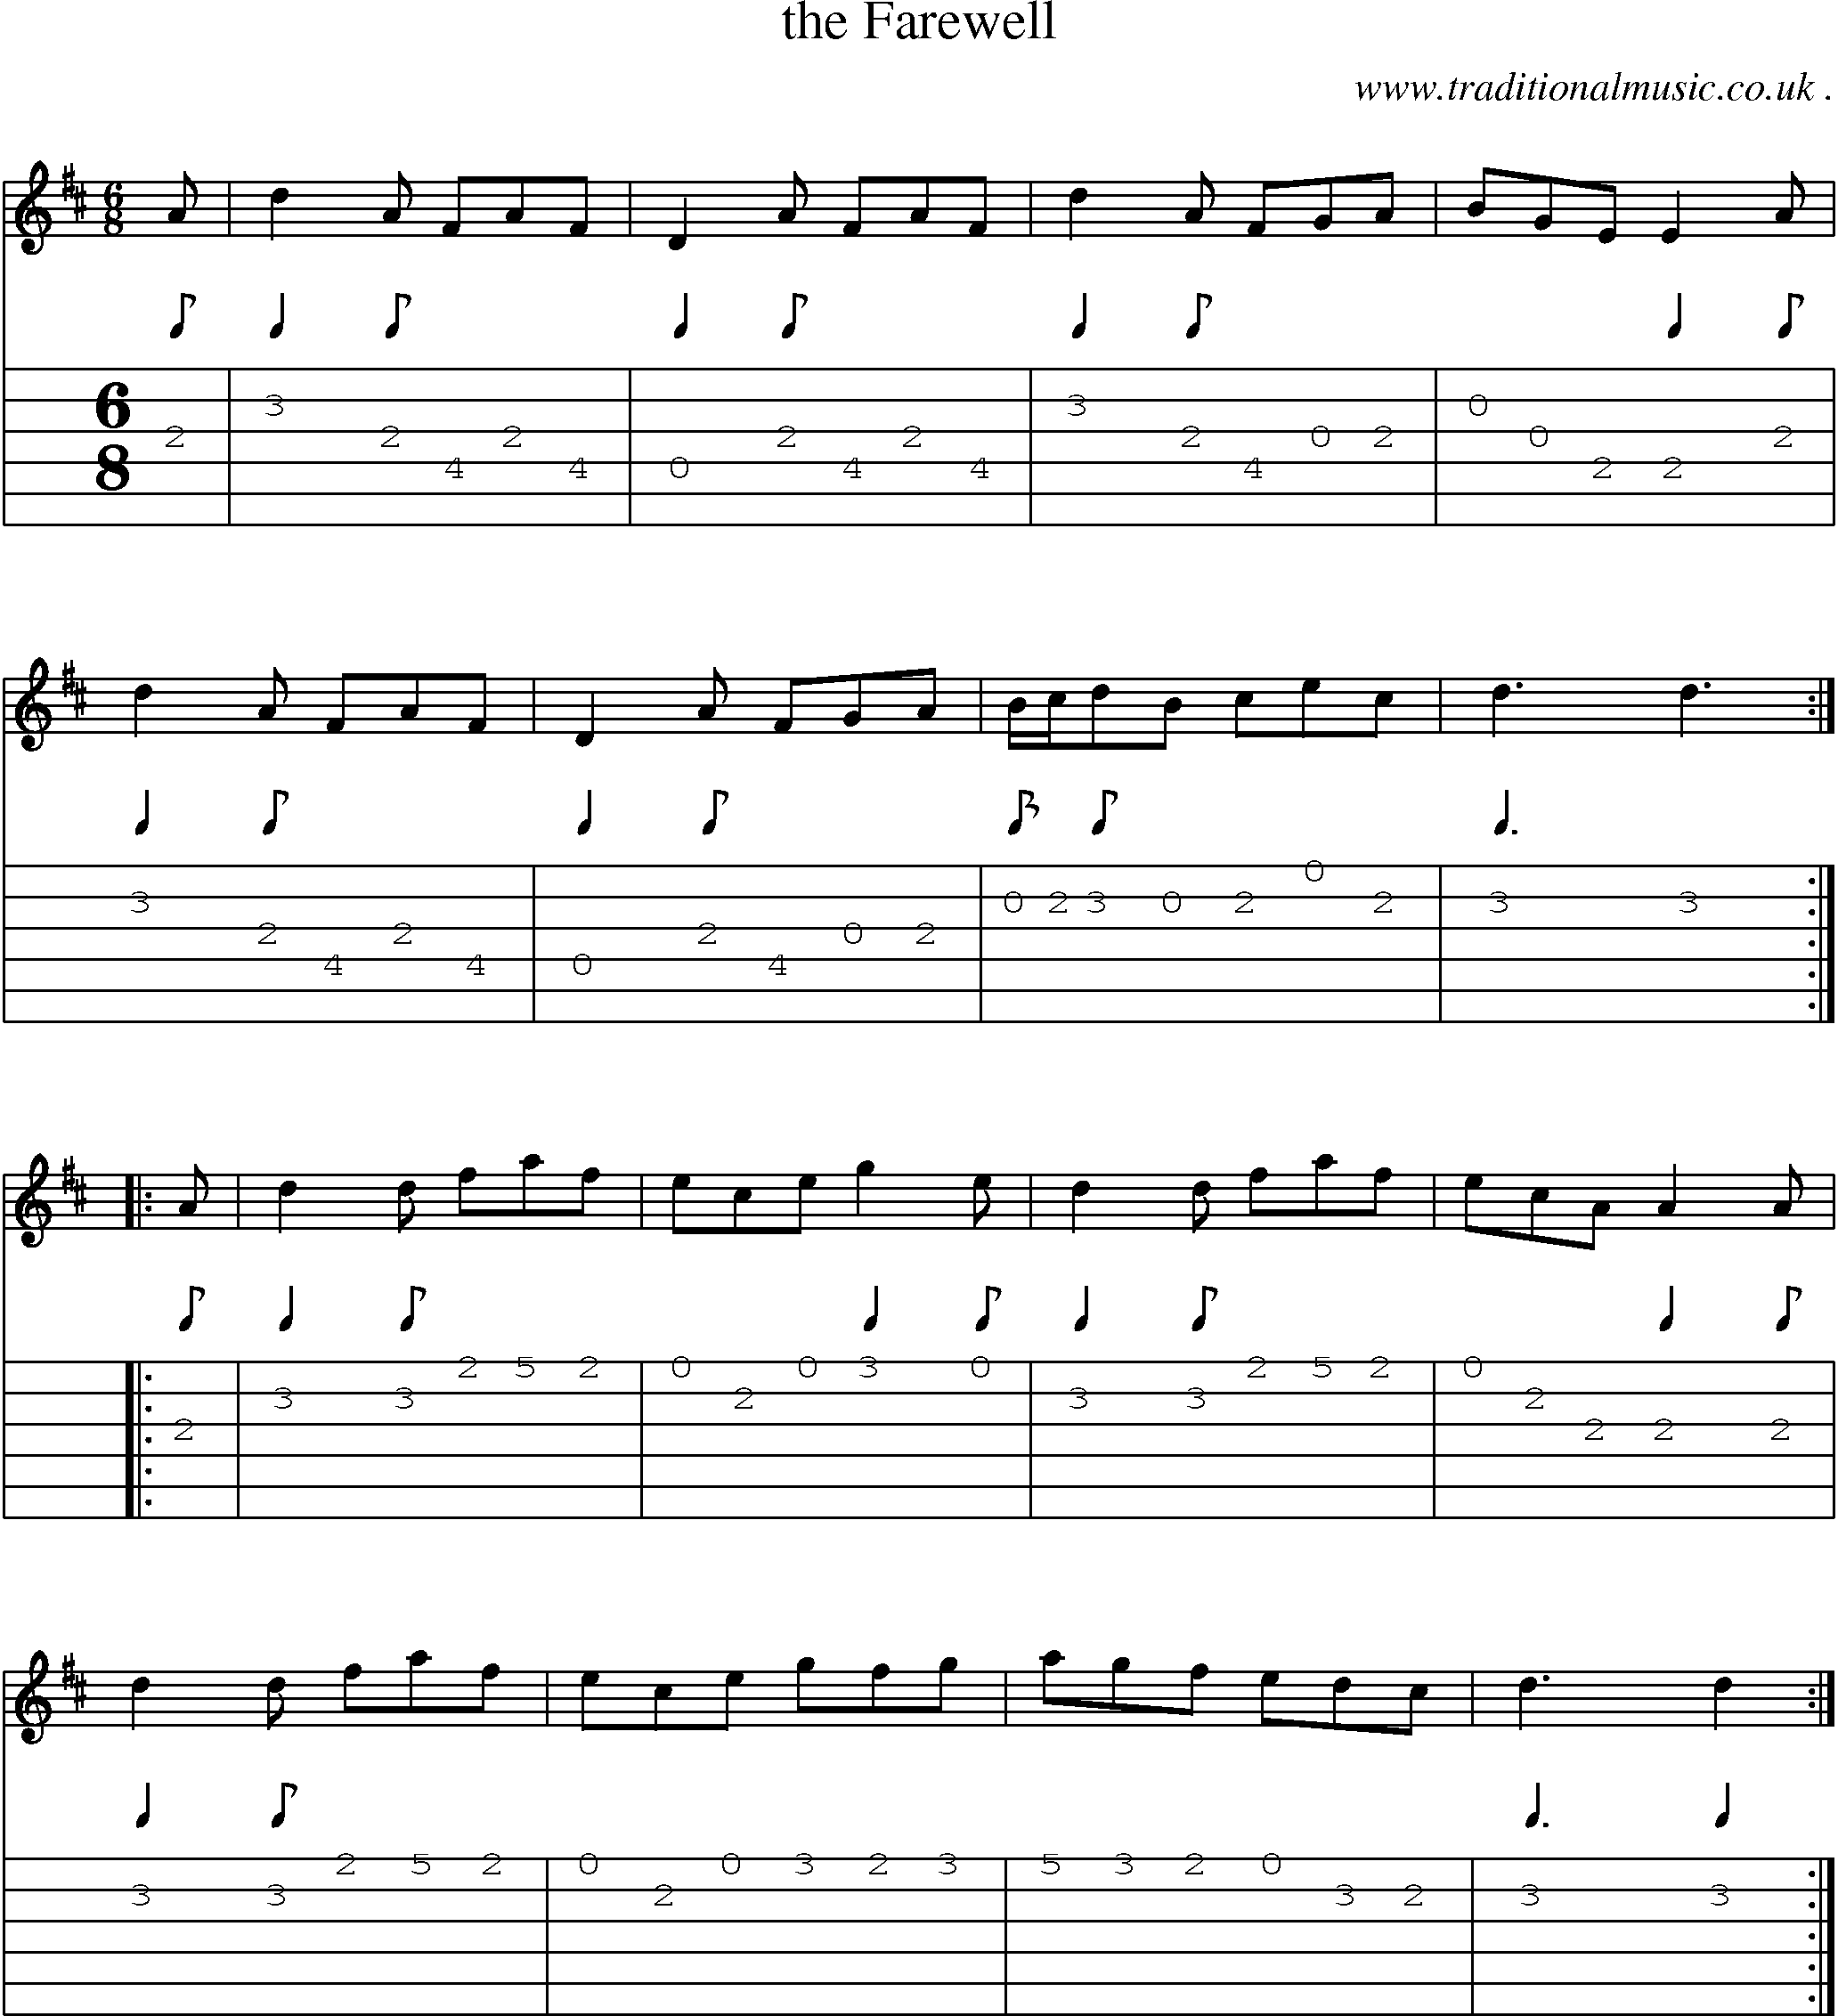 Sheet-Music and Guitar Tabs for The Farewell